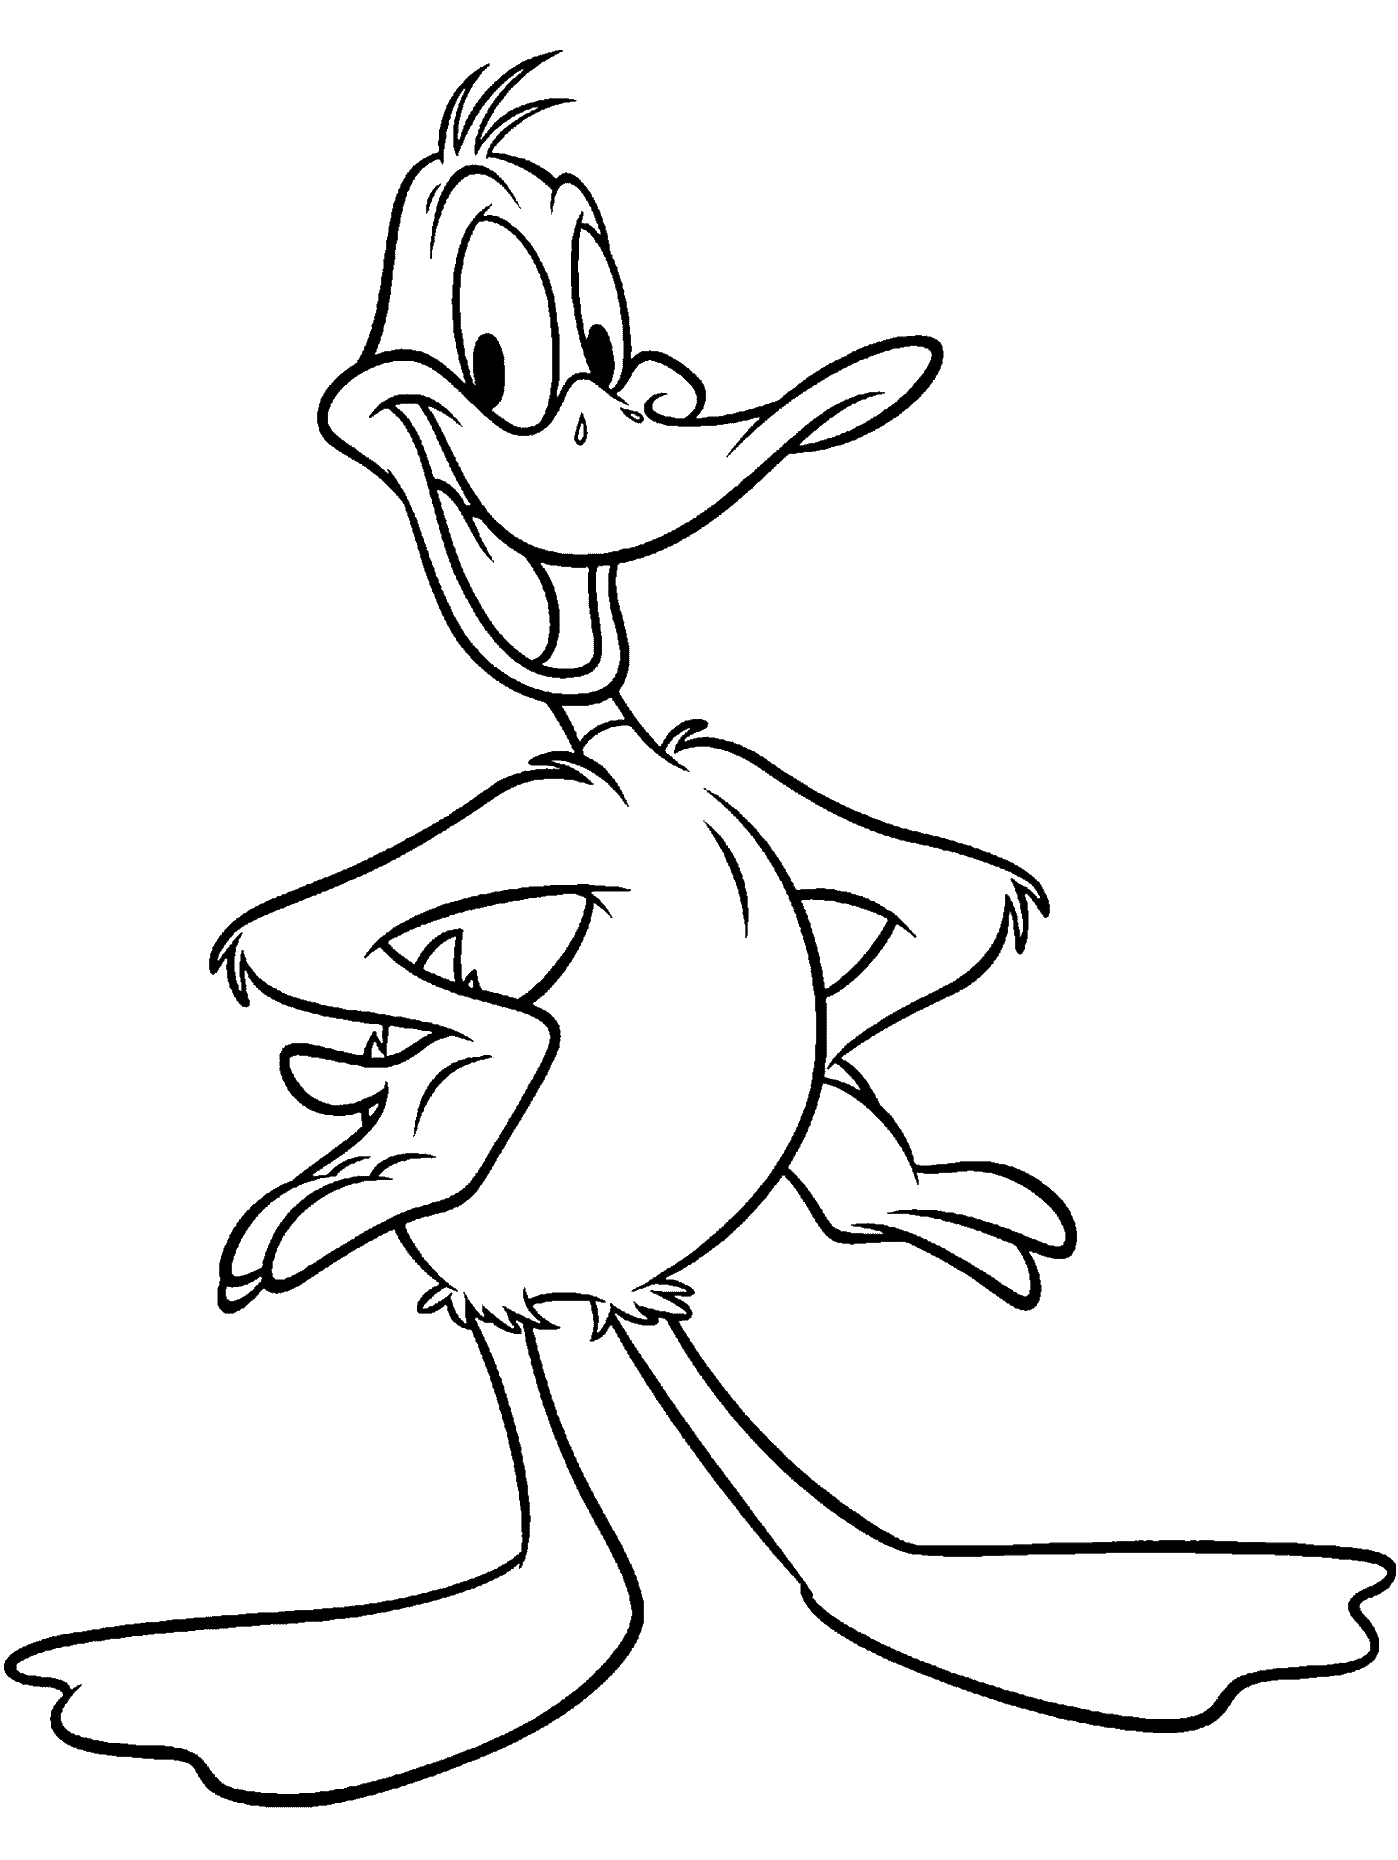 Daffy duck cartoon coloring pages coloring pages disney coloring pages